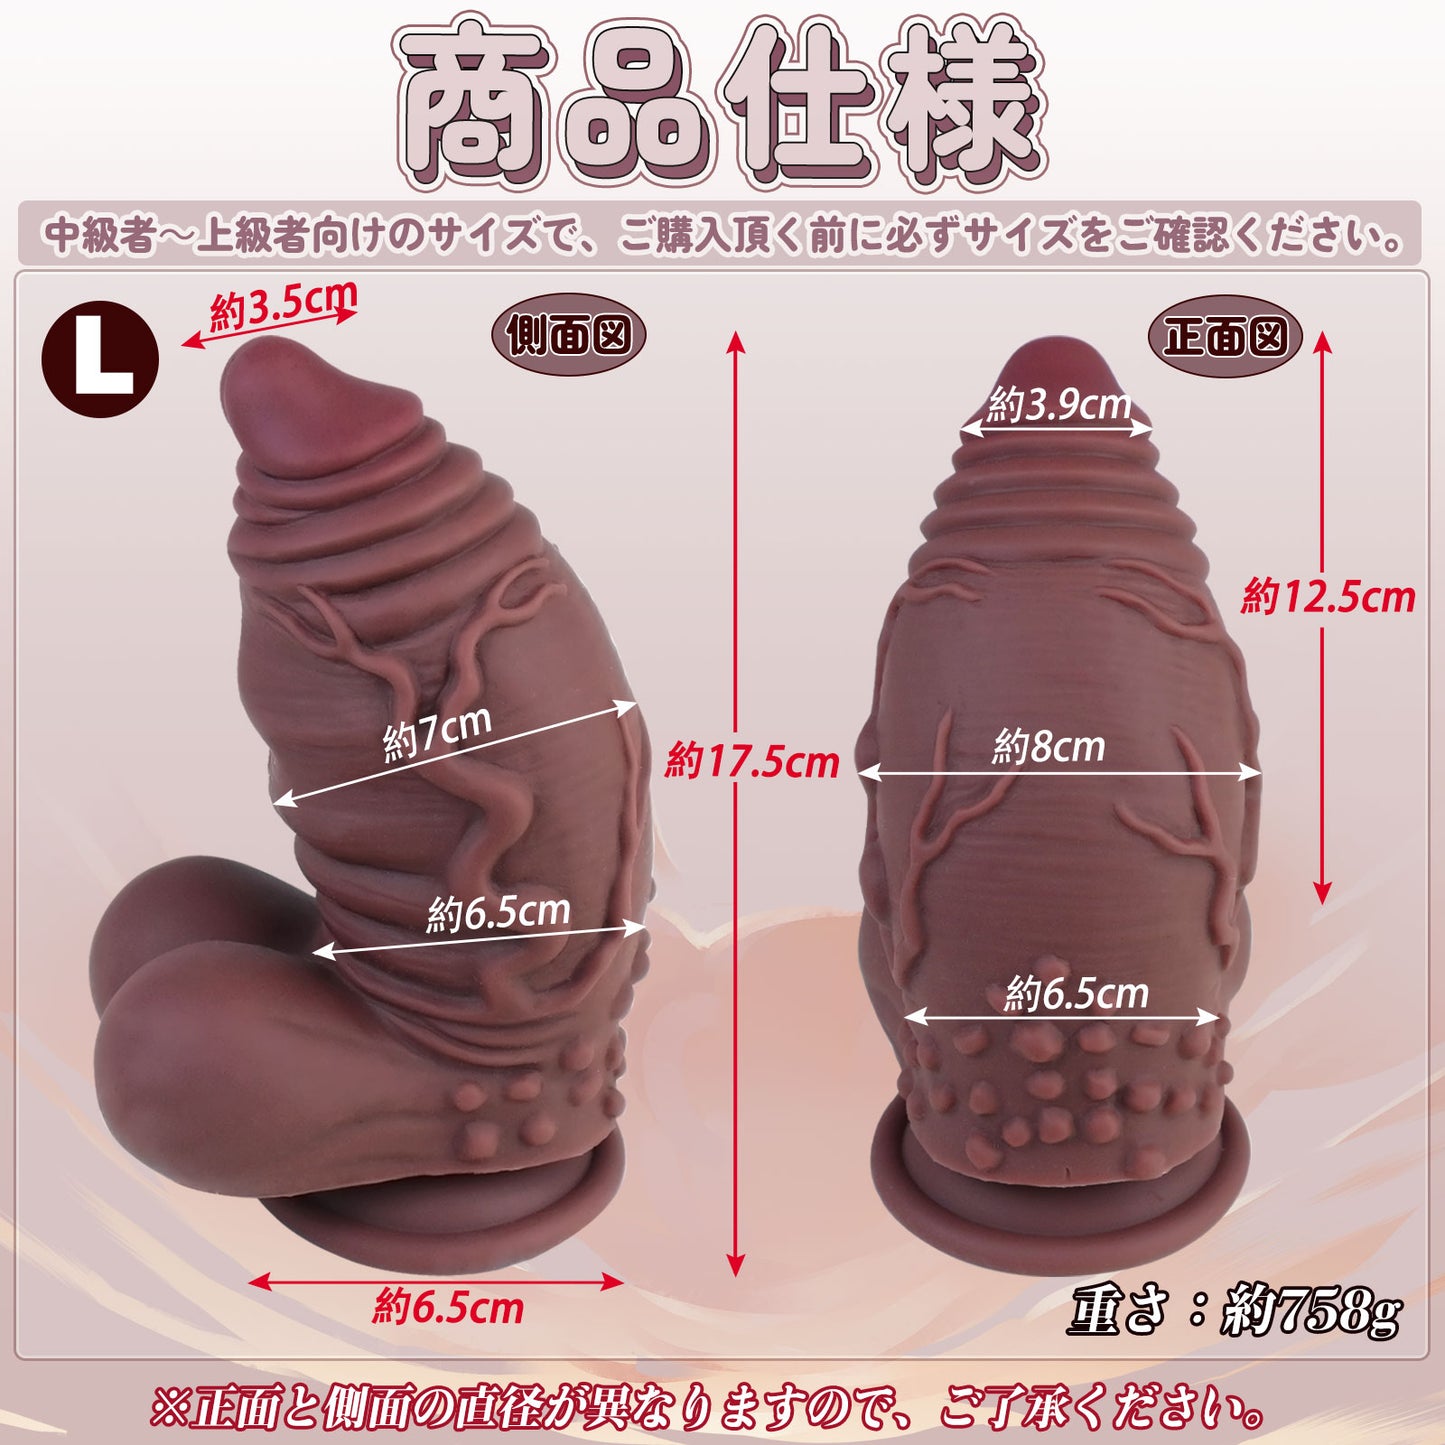 TaRiss's Gouetsu Dildo with uneven surface, suction cup specification, liquid silicone, 7cmx15.5cm